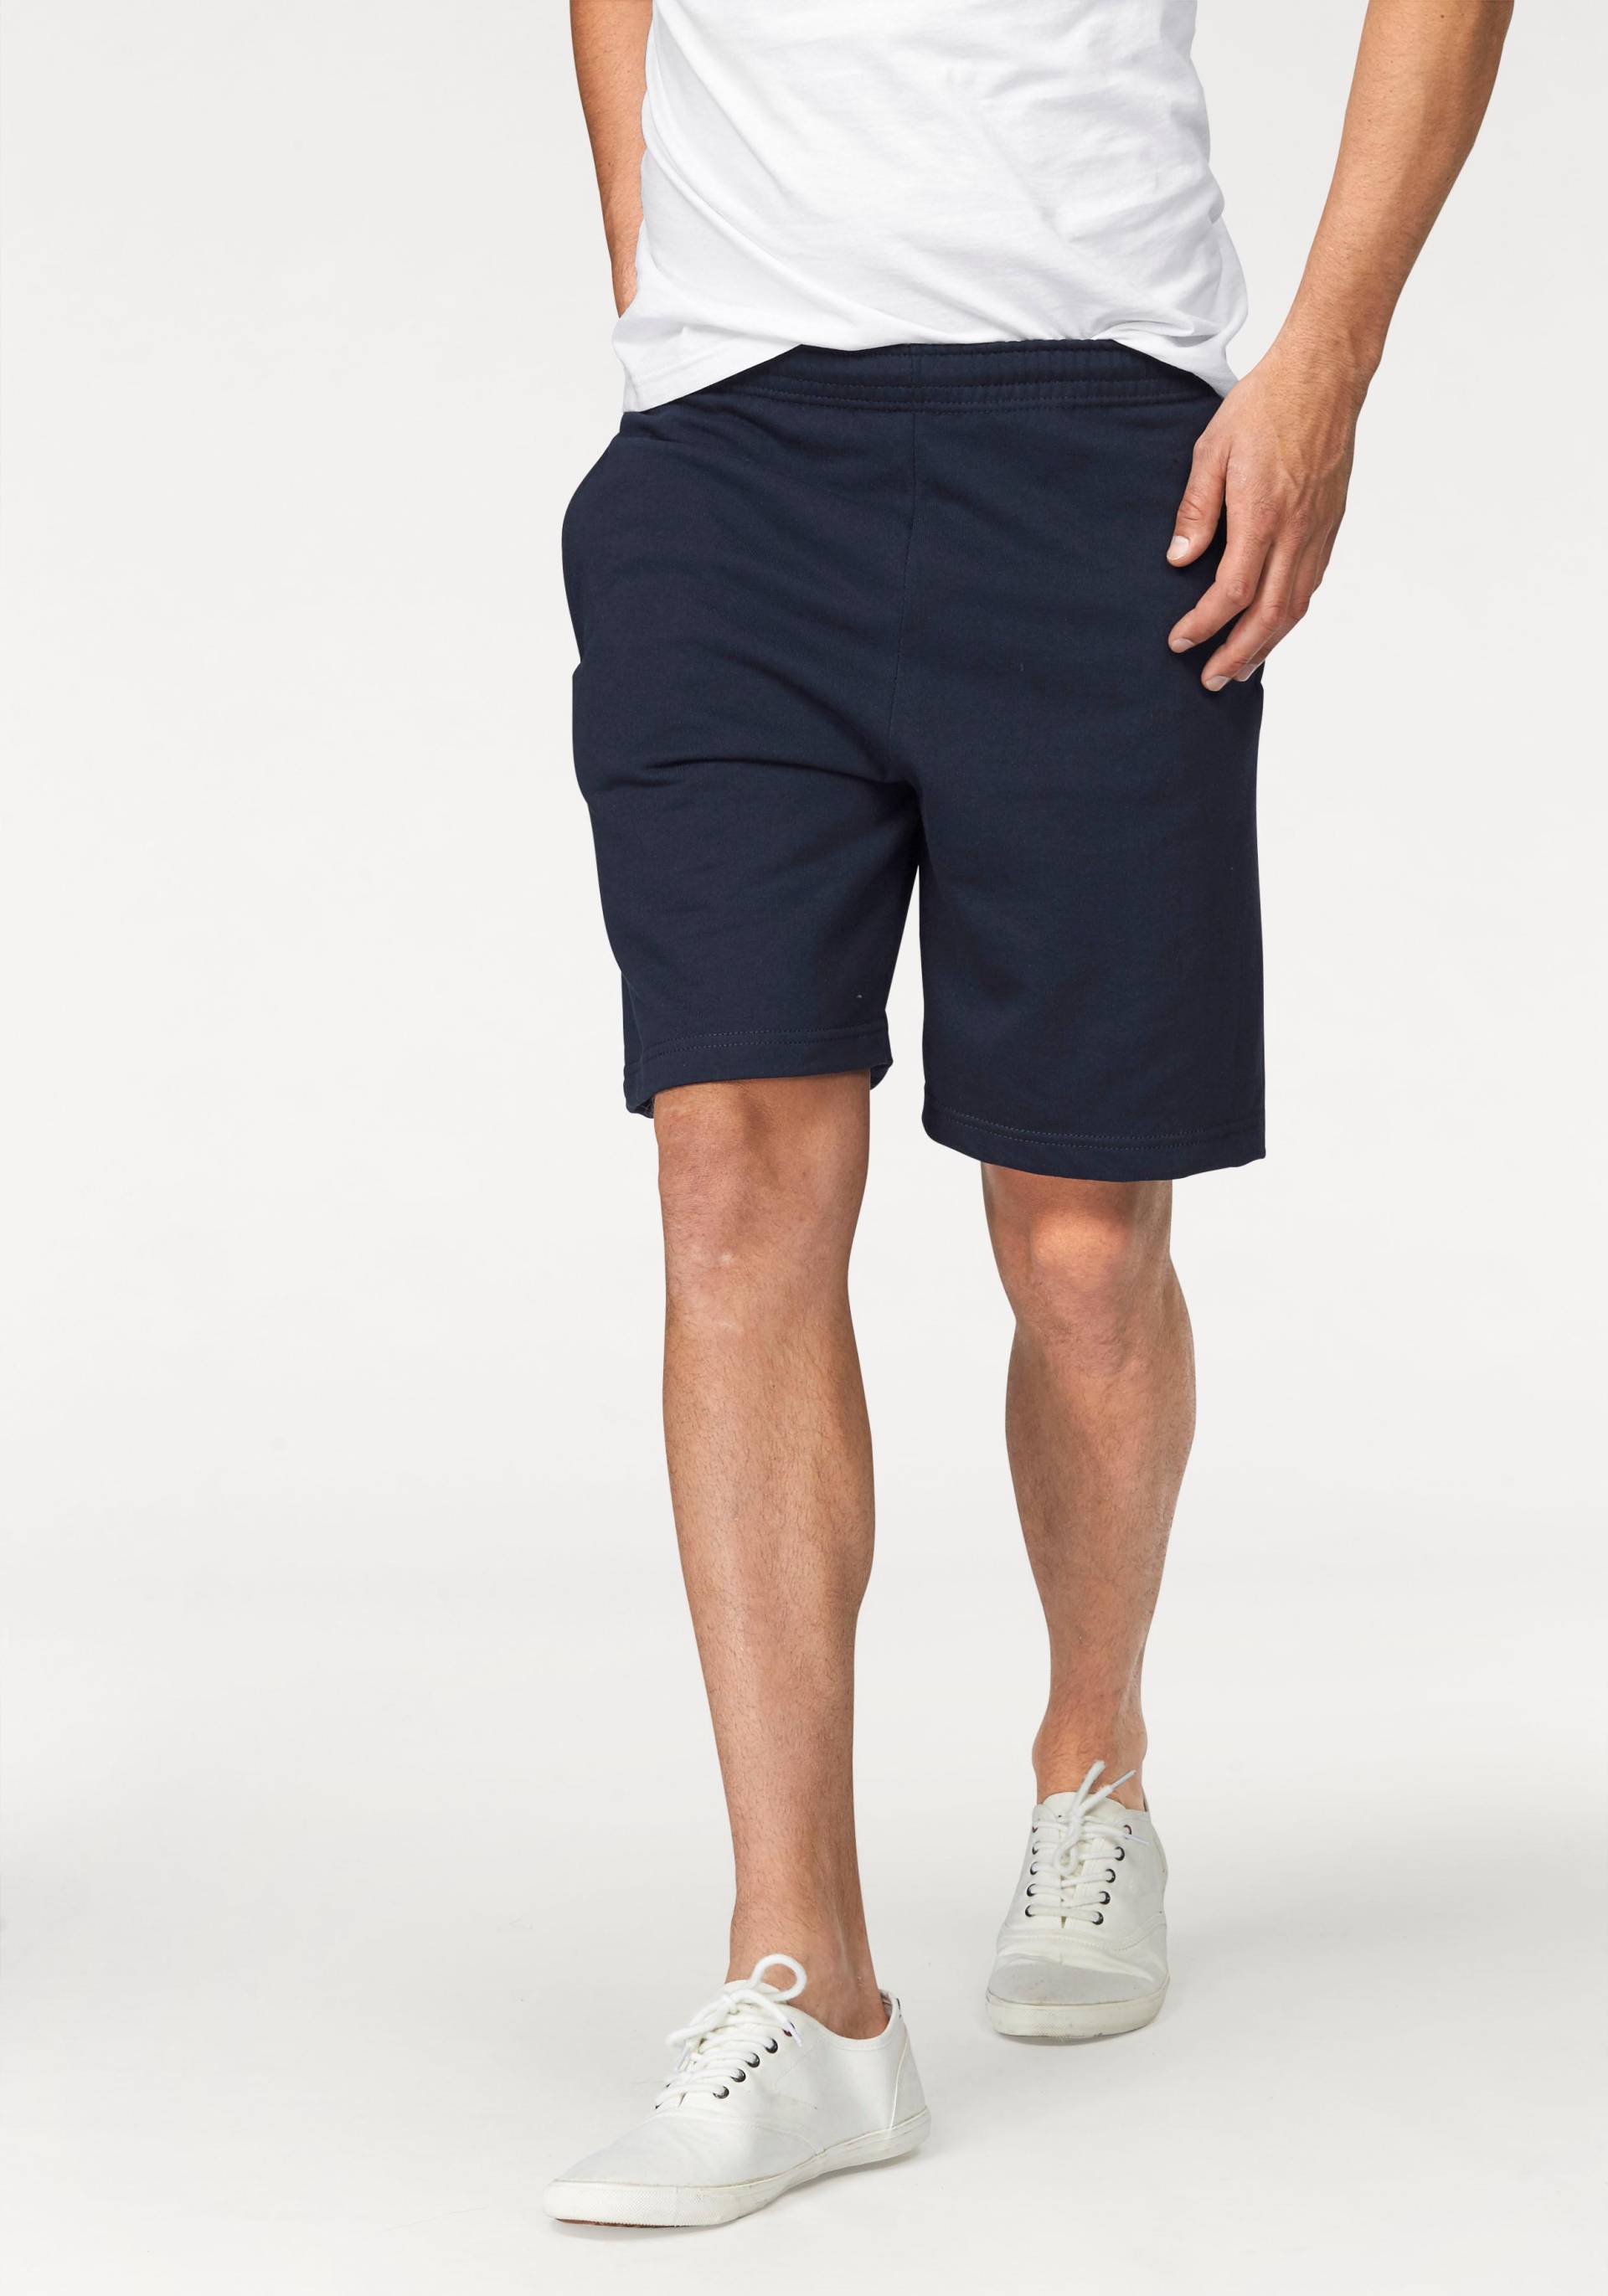 Fruit of the Loom Sweatshorts, in bequemer Form von Fruit of the Loom